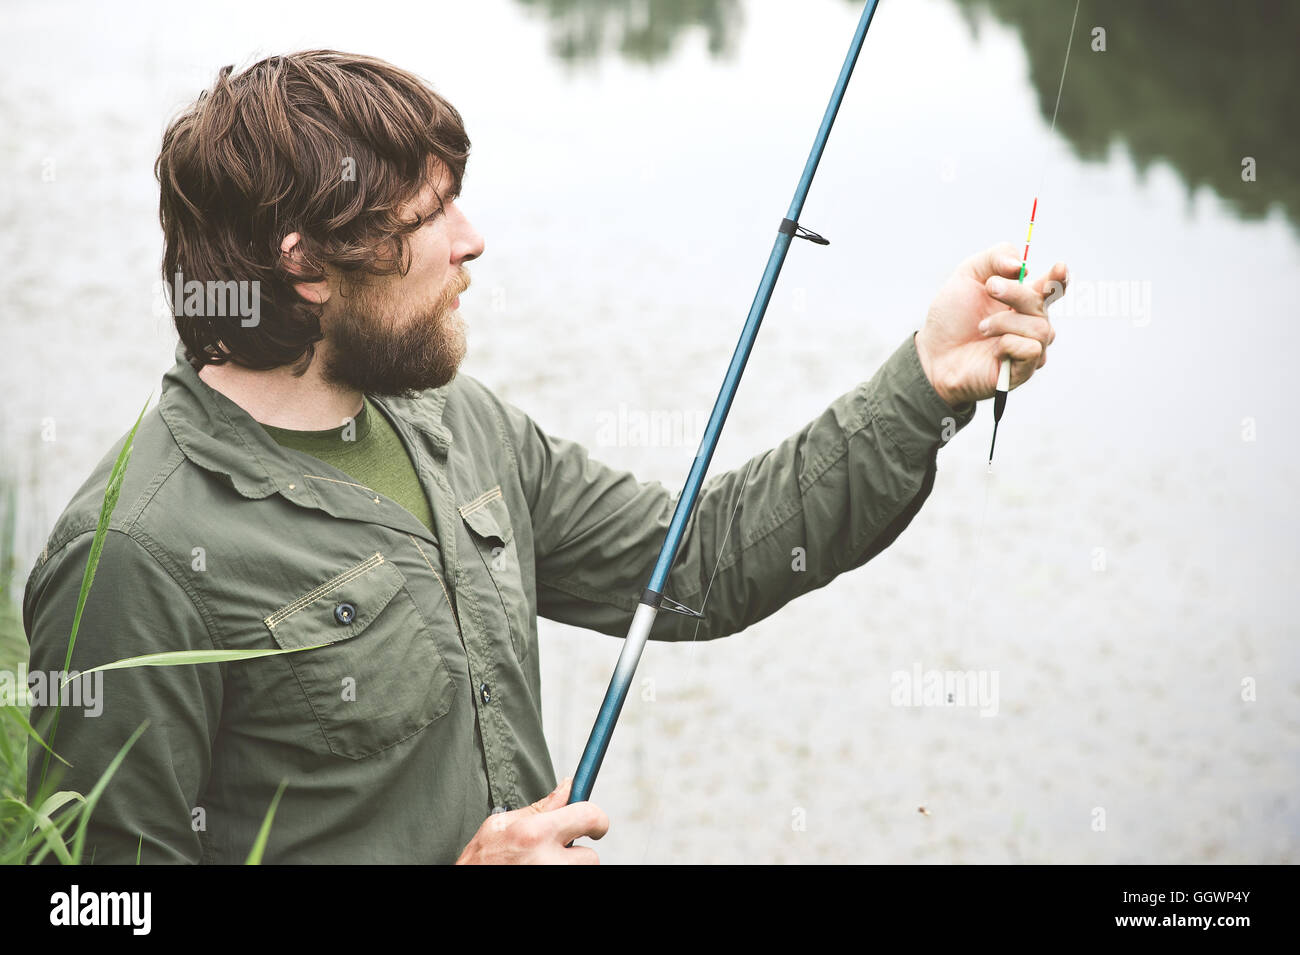 Young Man Fisherman bearded fishing with rod Lifestyle Travel